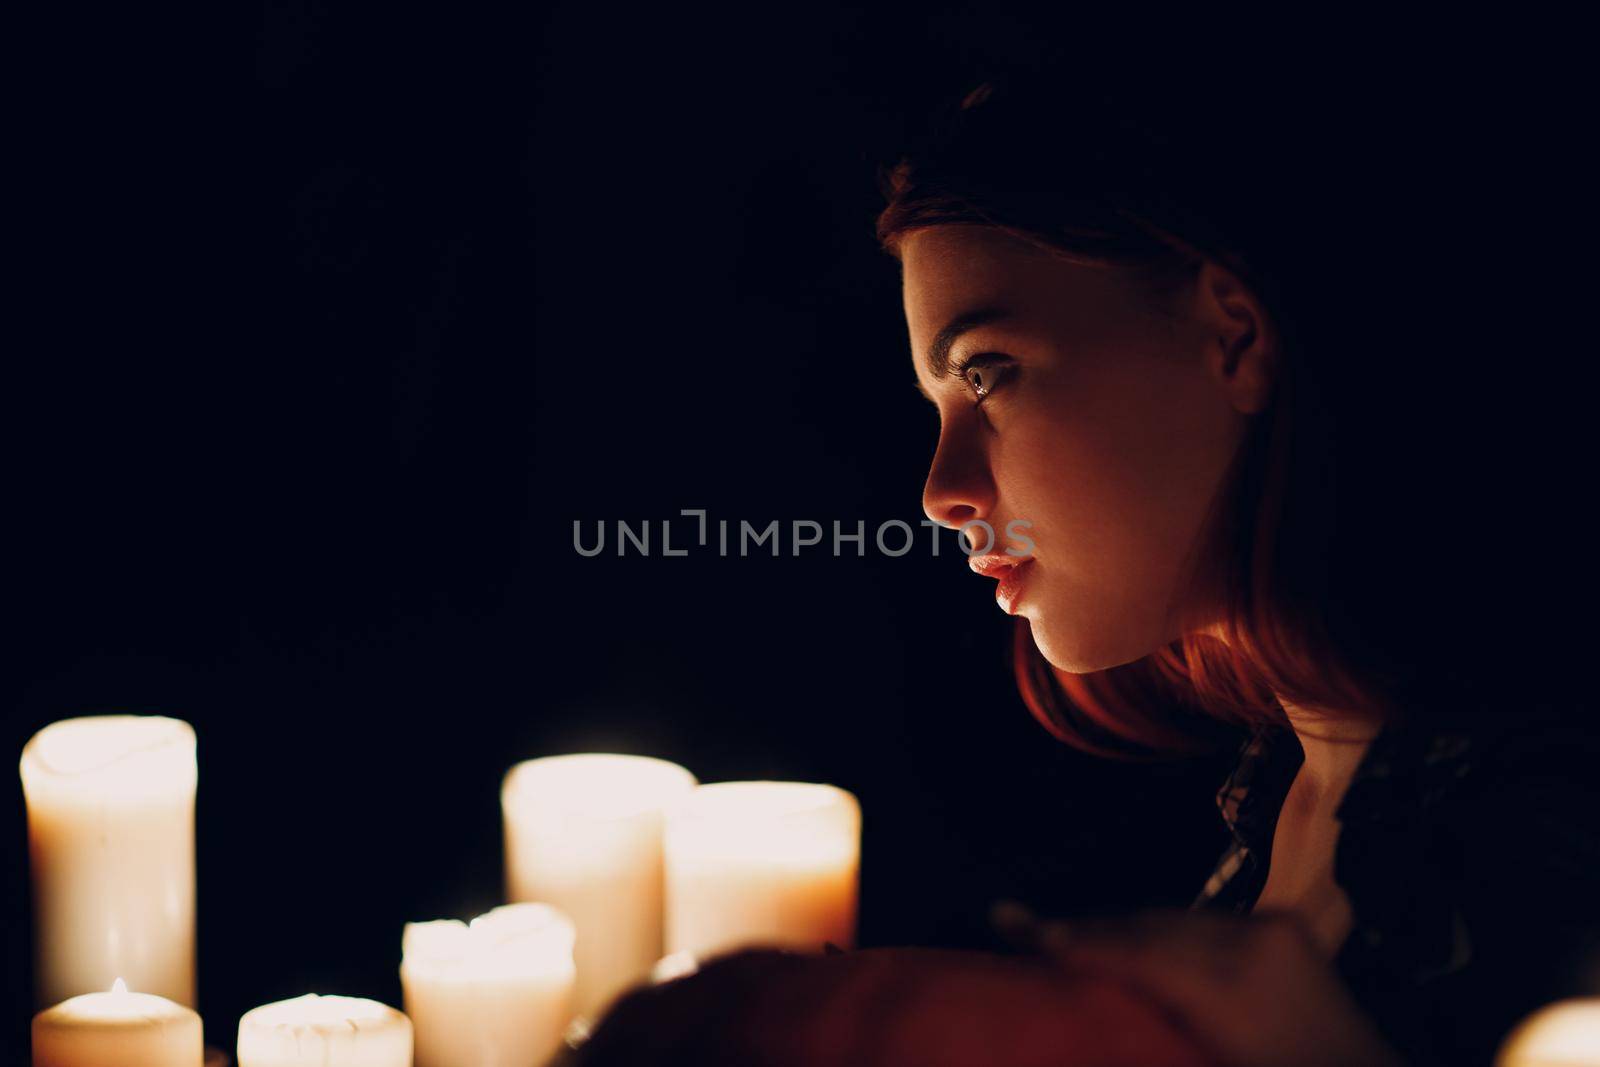 Young woman profile portrait with candles light in darkness. Edge lit face